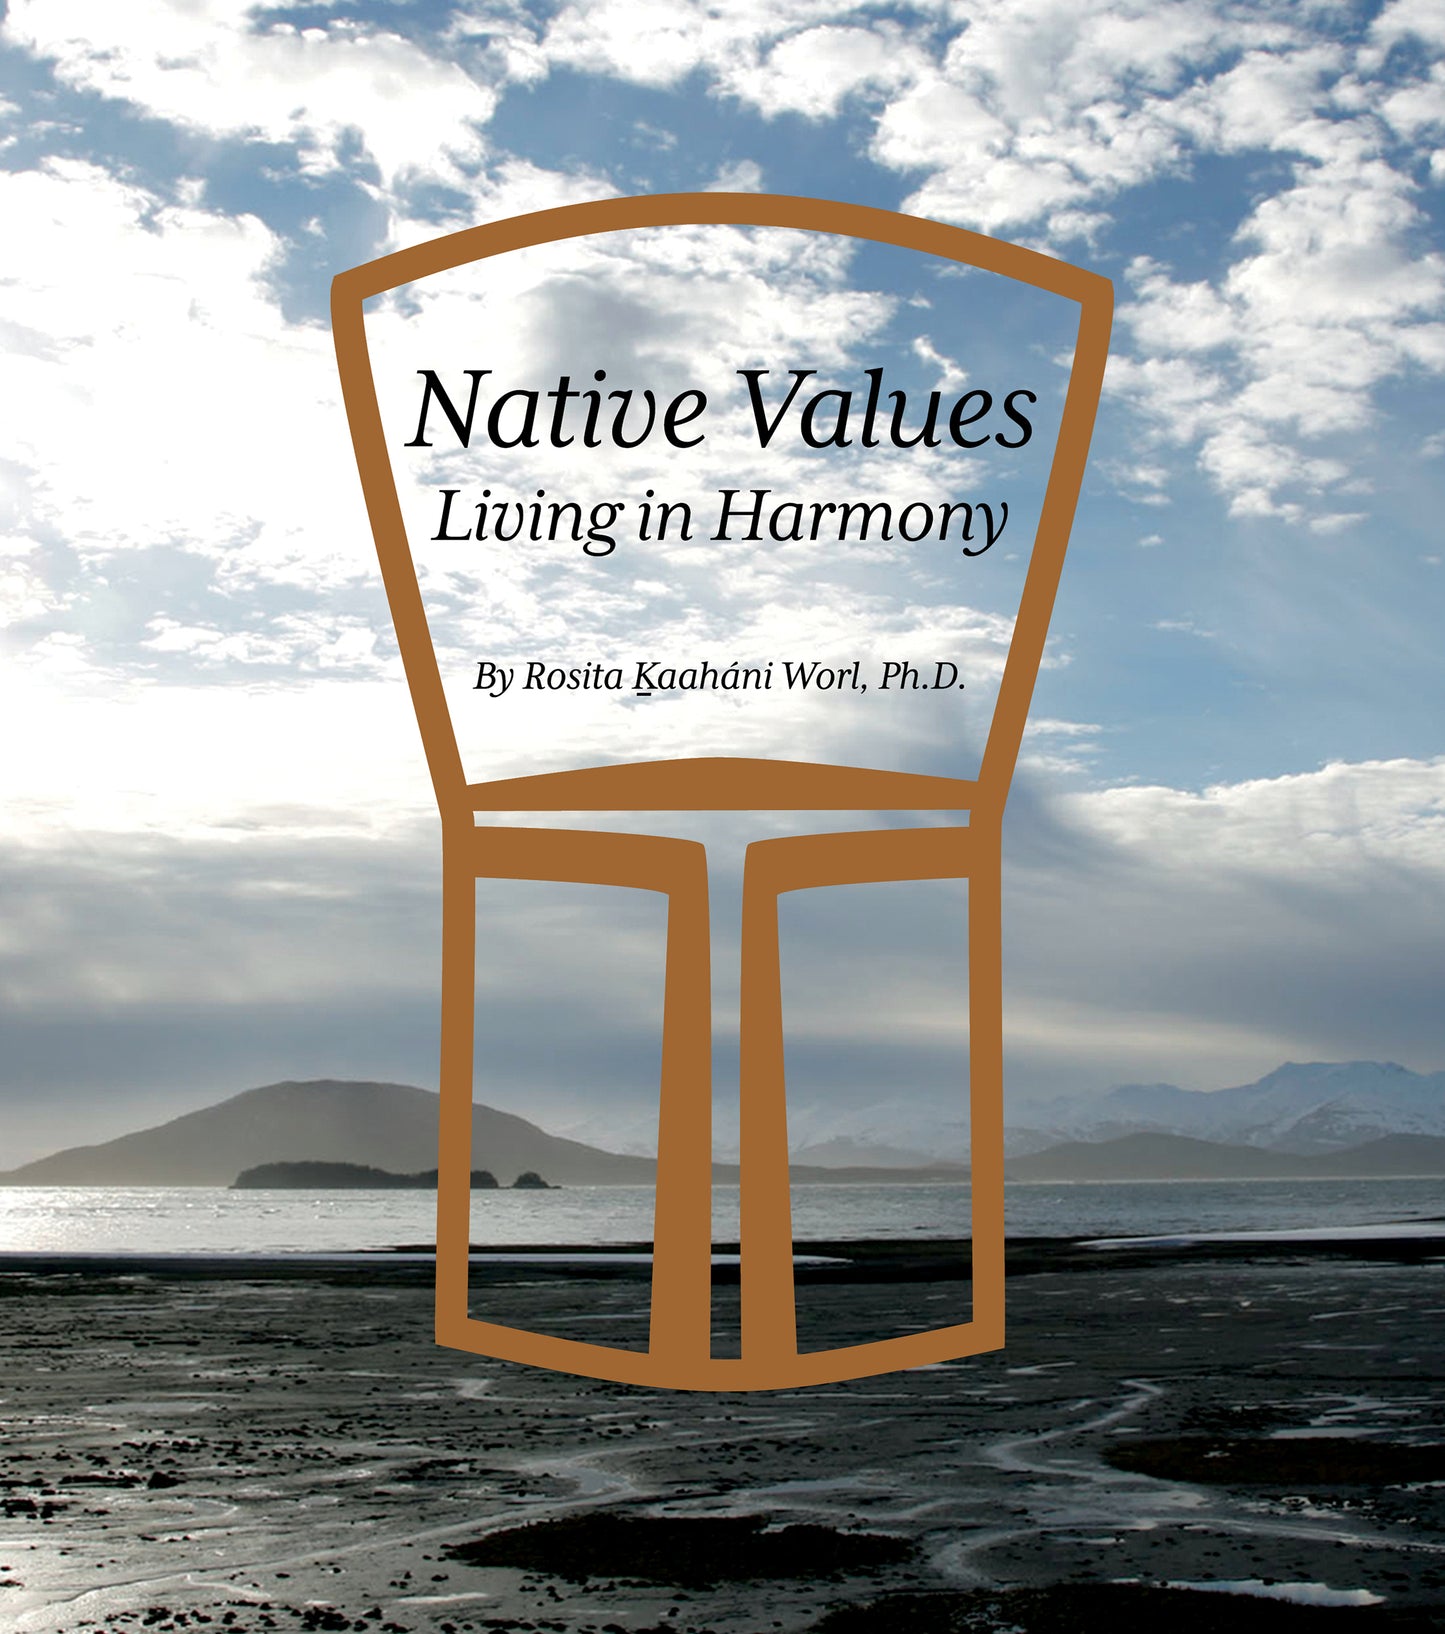 Book, BRR - "Native Values: Living in Harmony", R. Worl